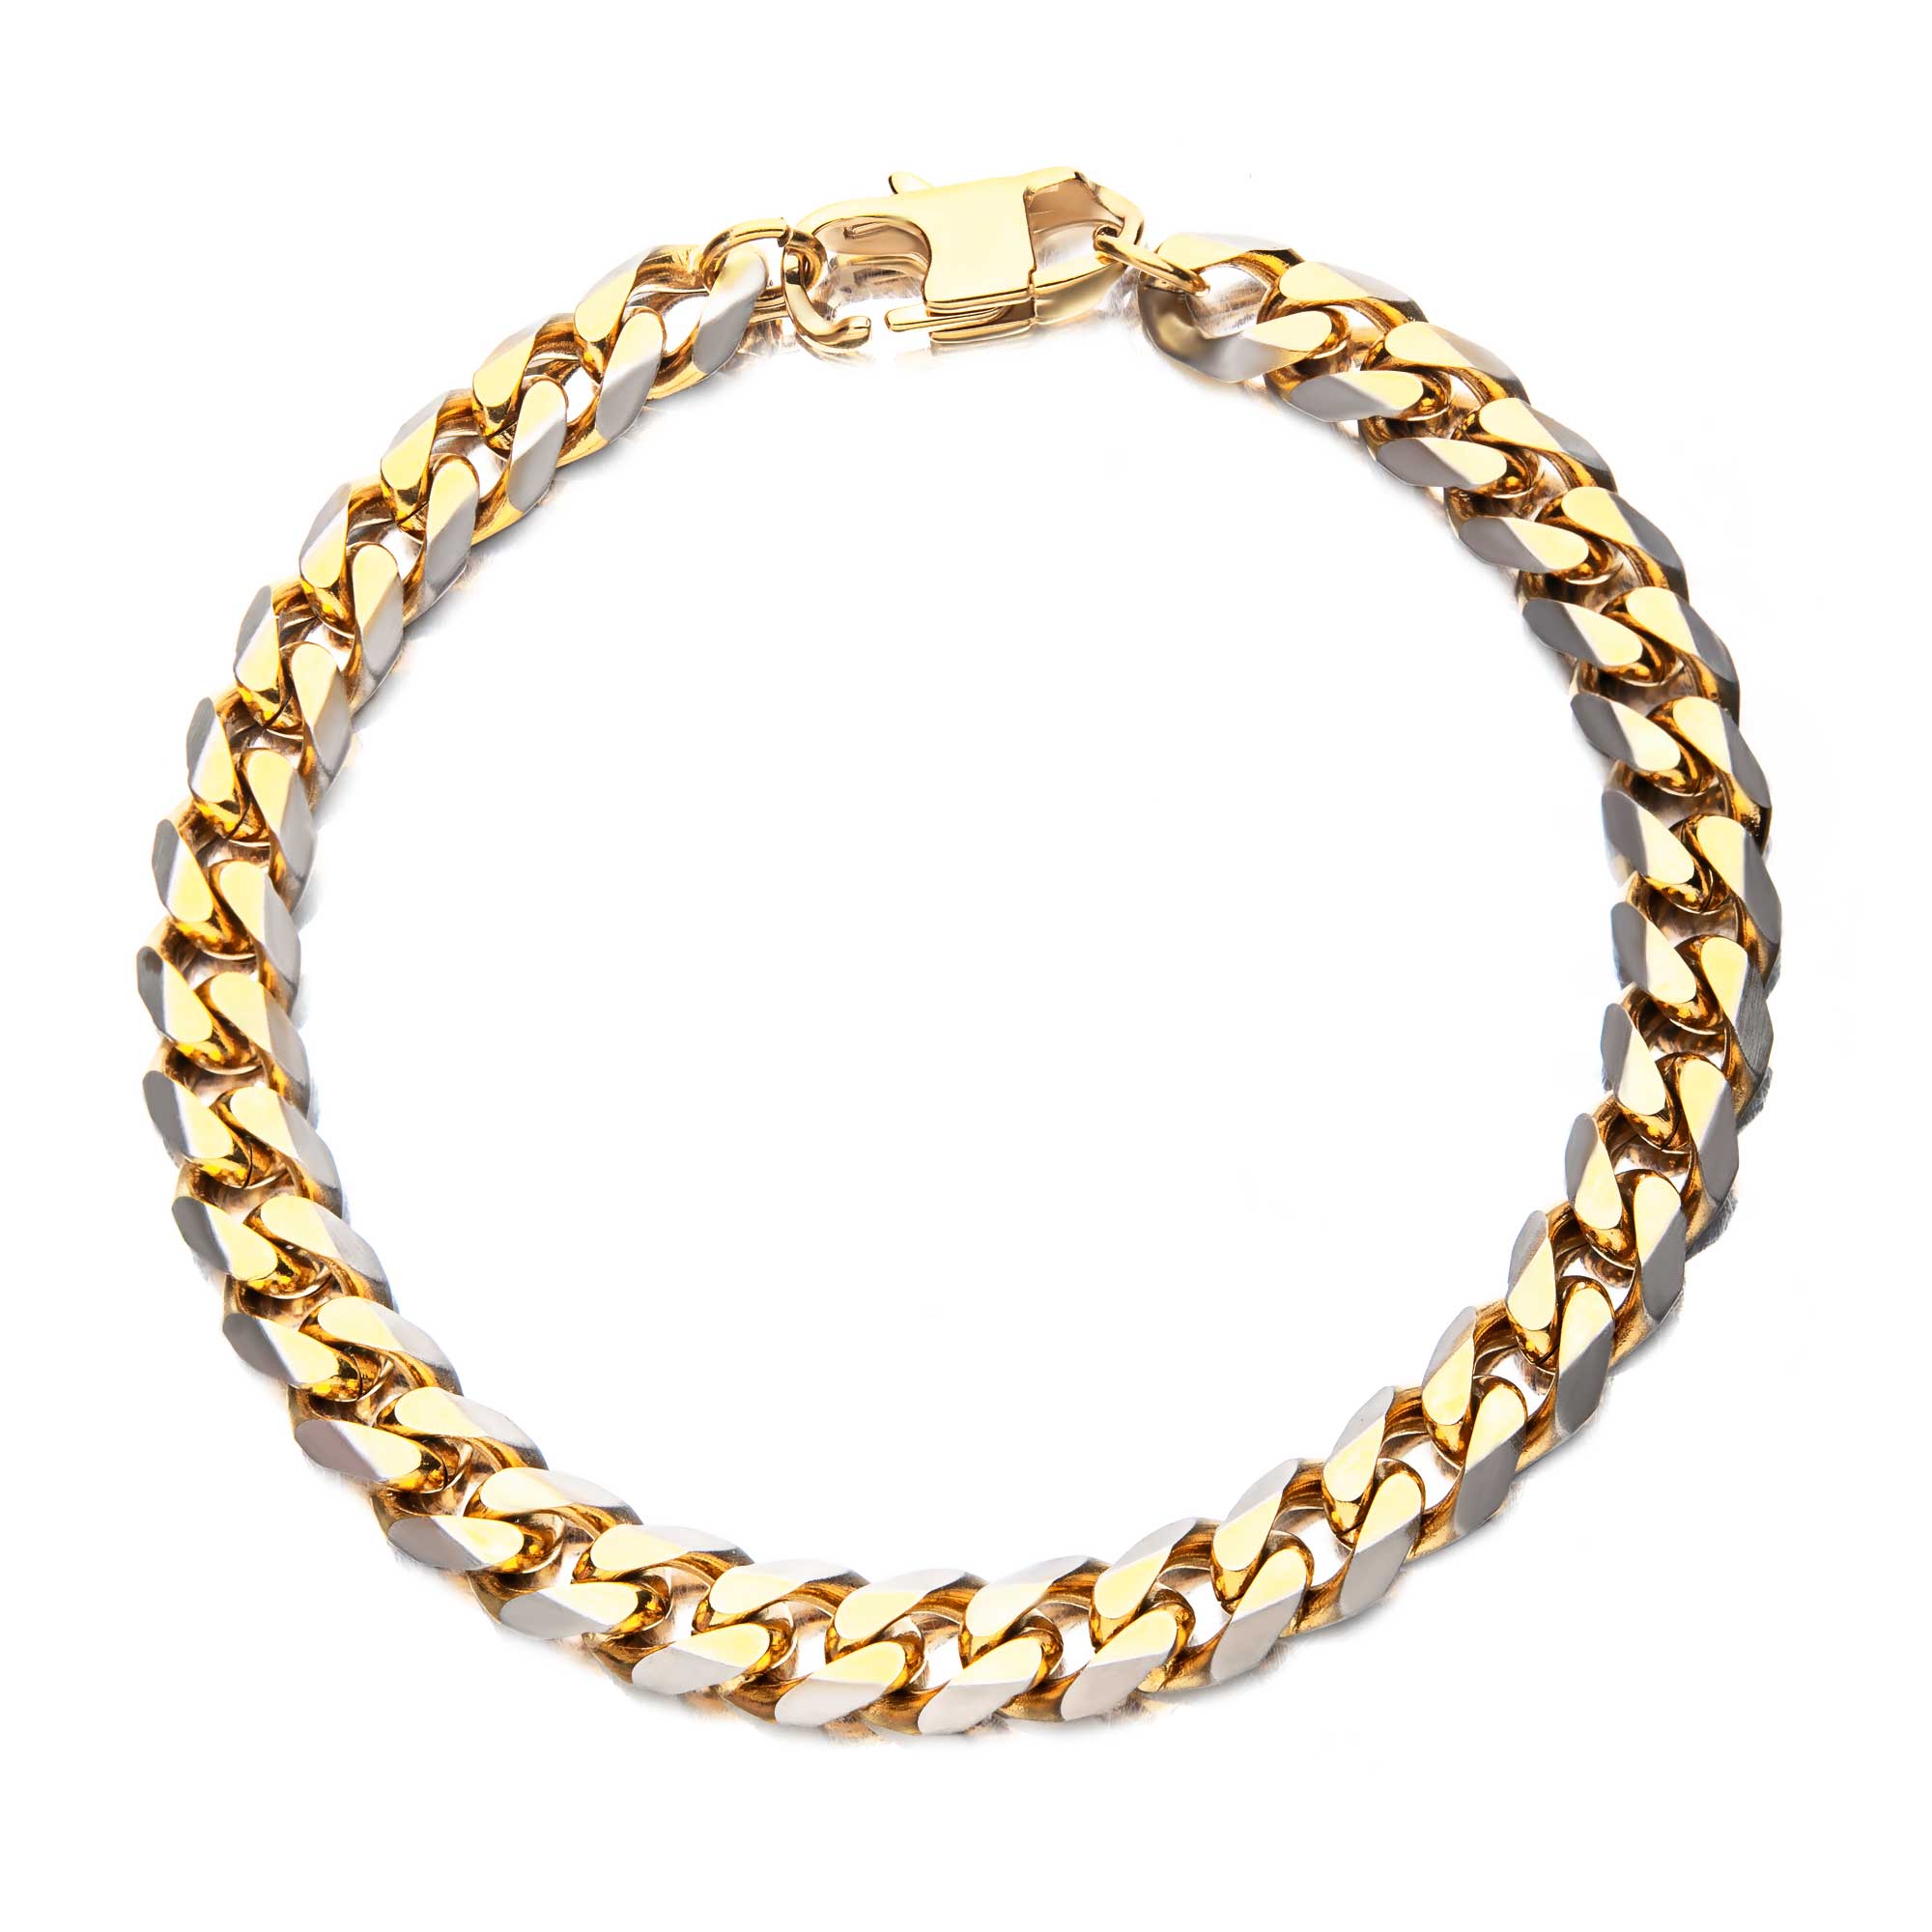 Stainless Steel Gold Plated 8mm Curb Chain with Lobster Clasp Image 2 Midtown Diamonds Reno, NV